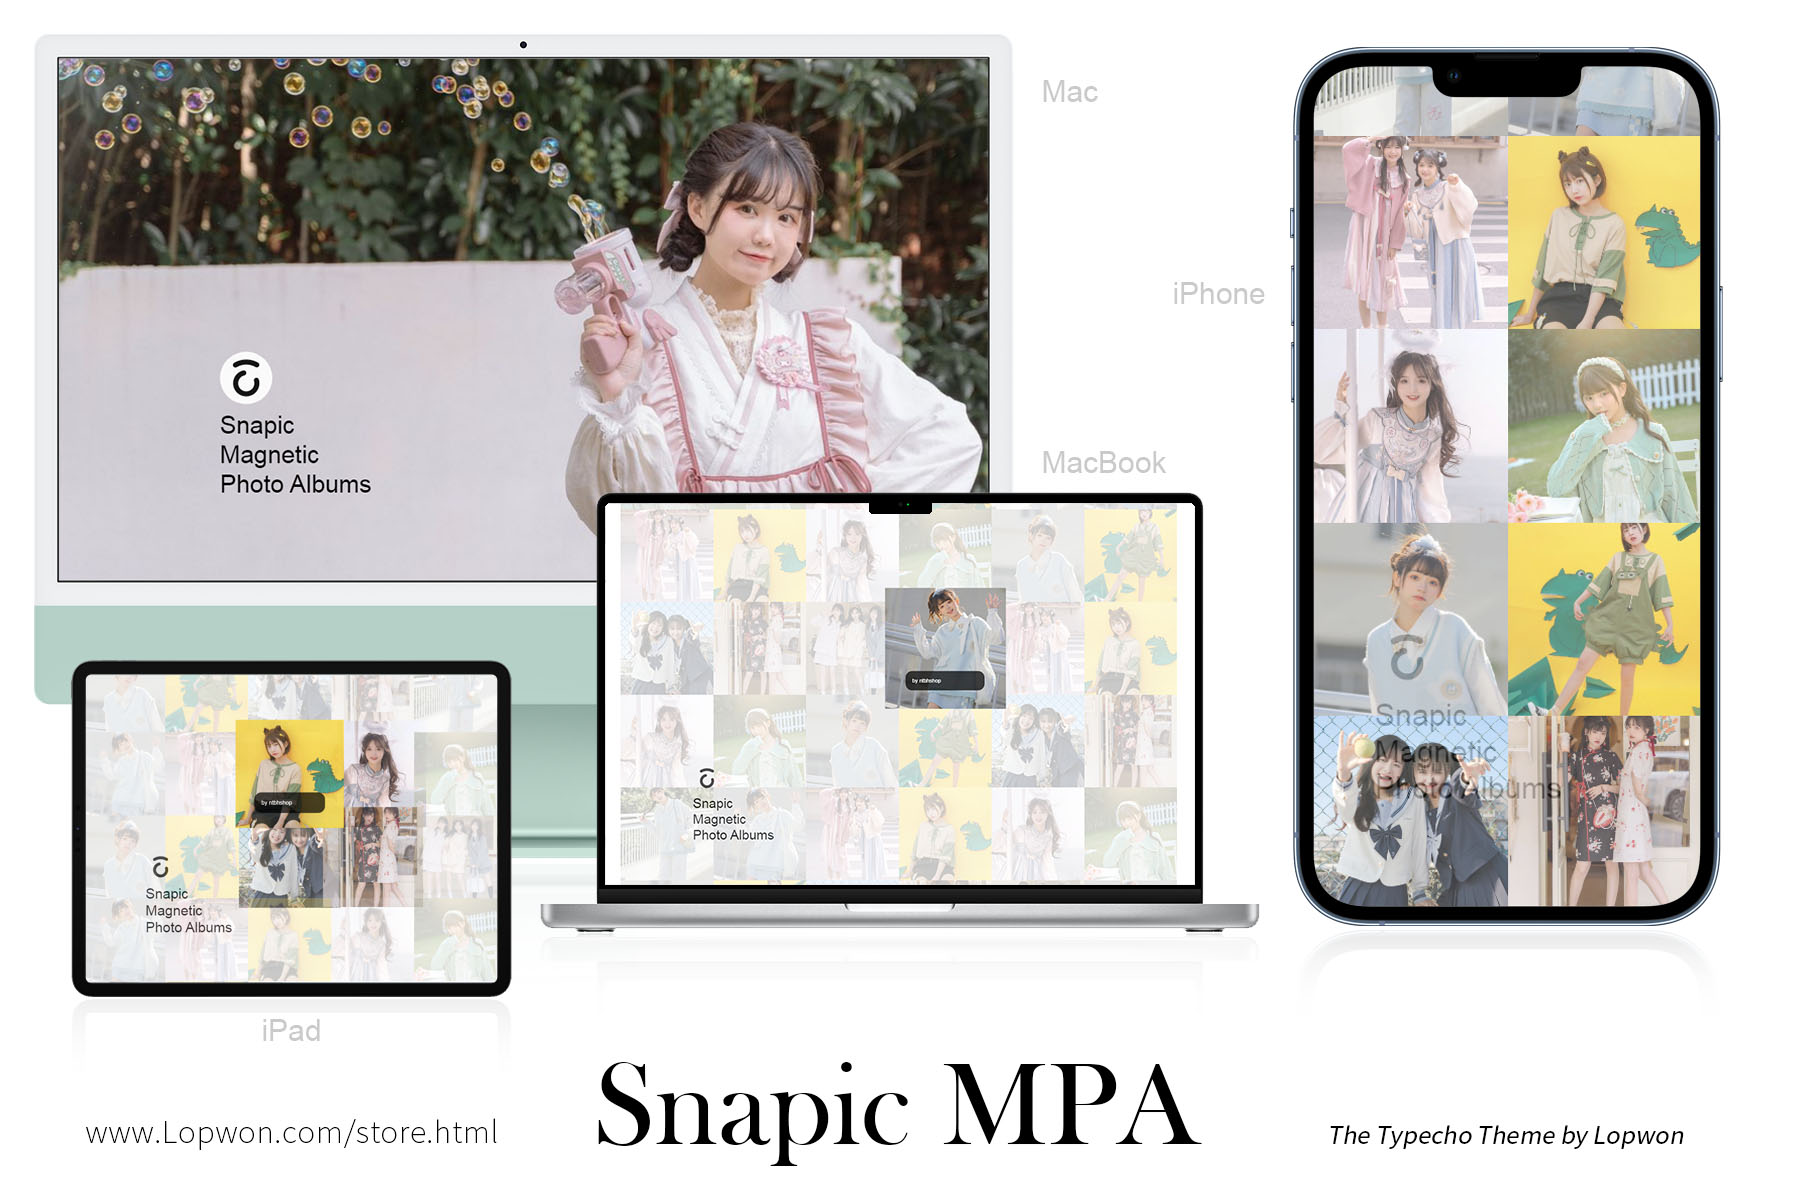 Snapic MPA 使用文档